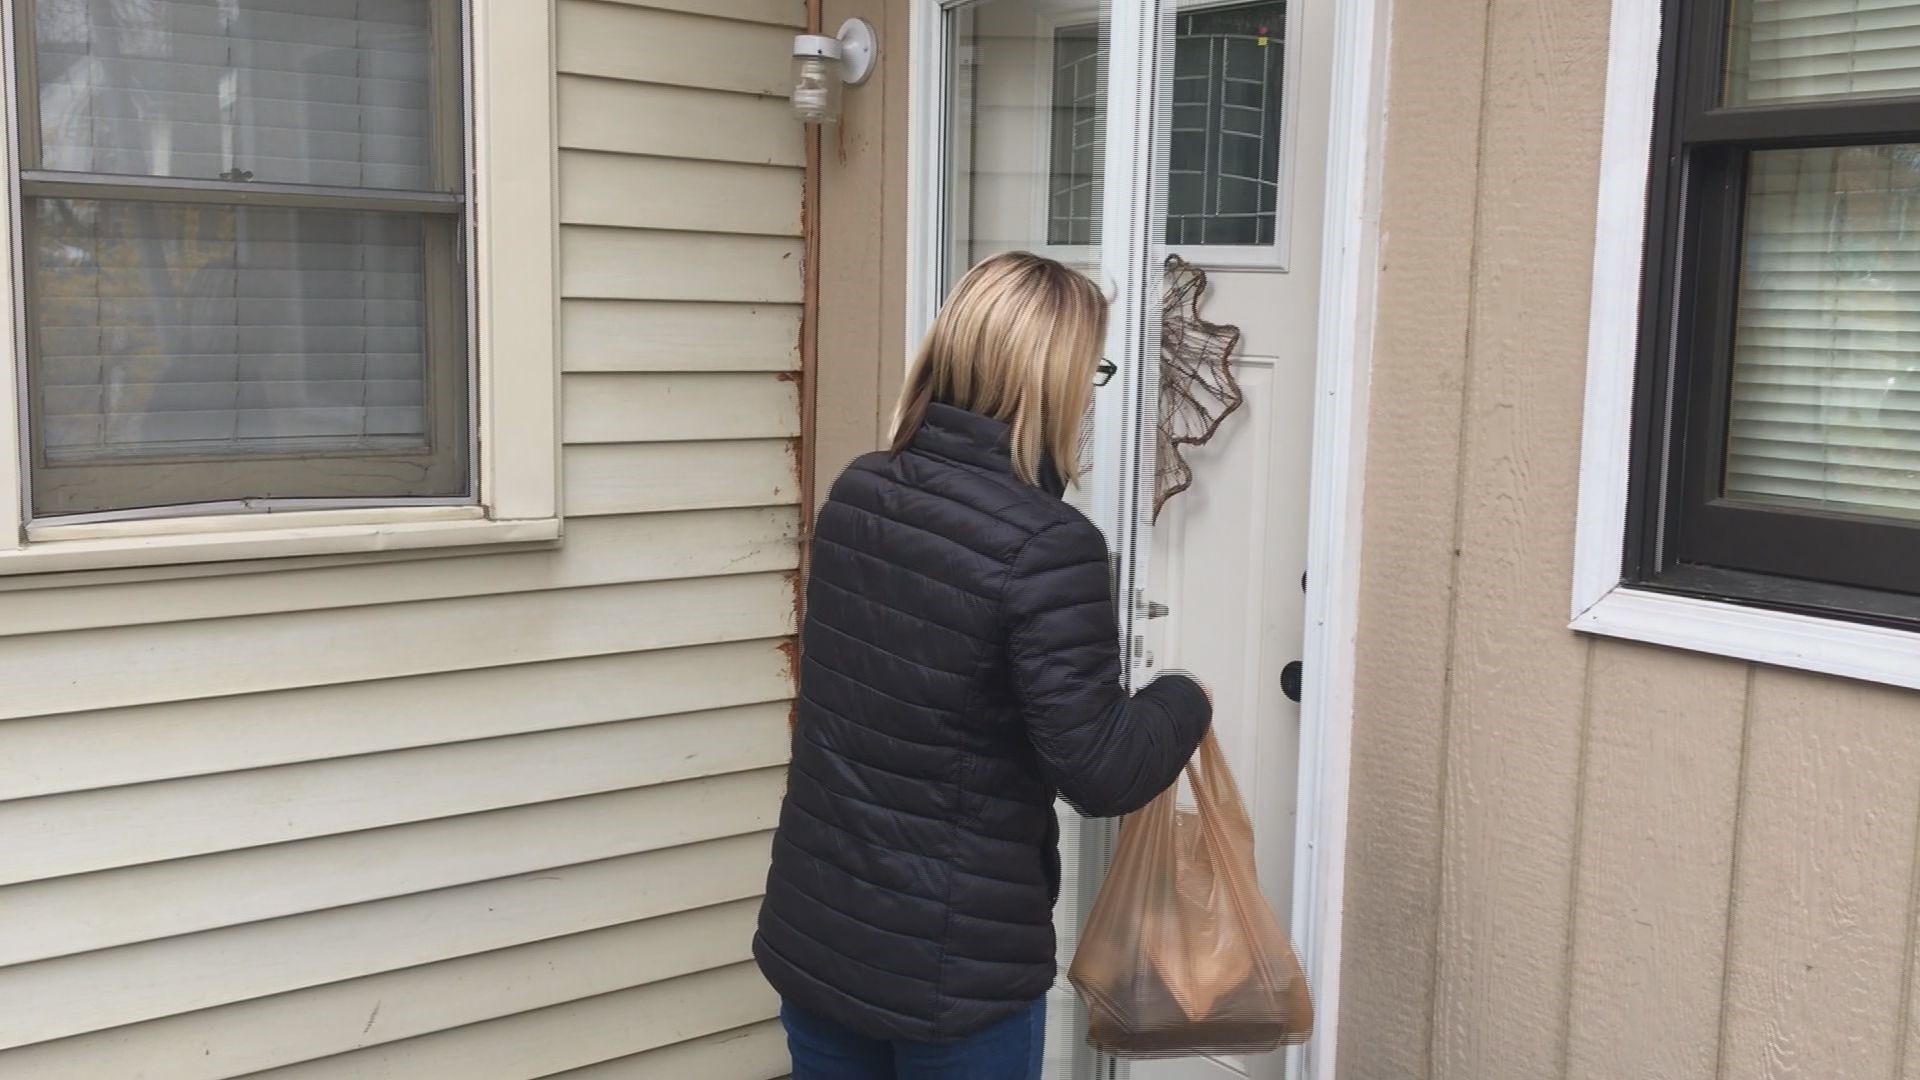 COVID-19 is impacting the Meals On Wheels food delivery program.